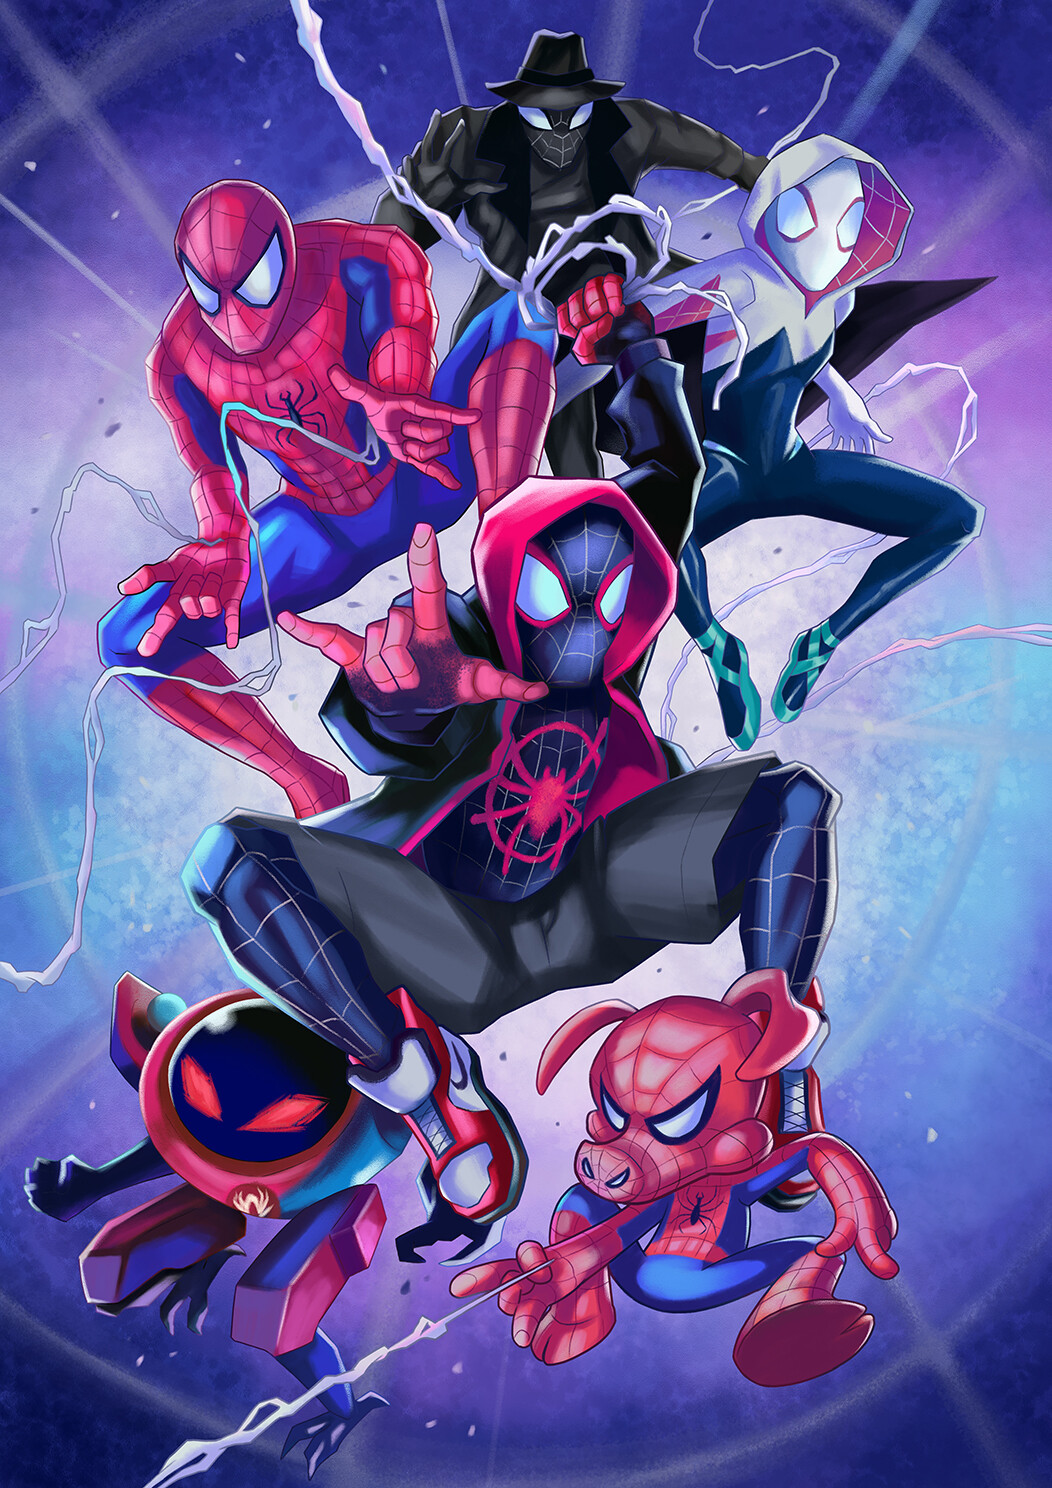 My fan art done last year during the release of "Spider-Man: Into the...